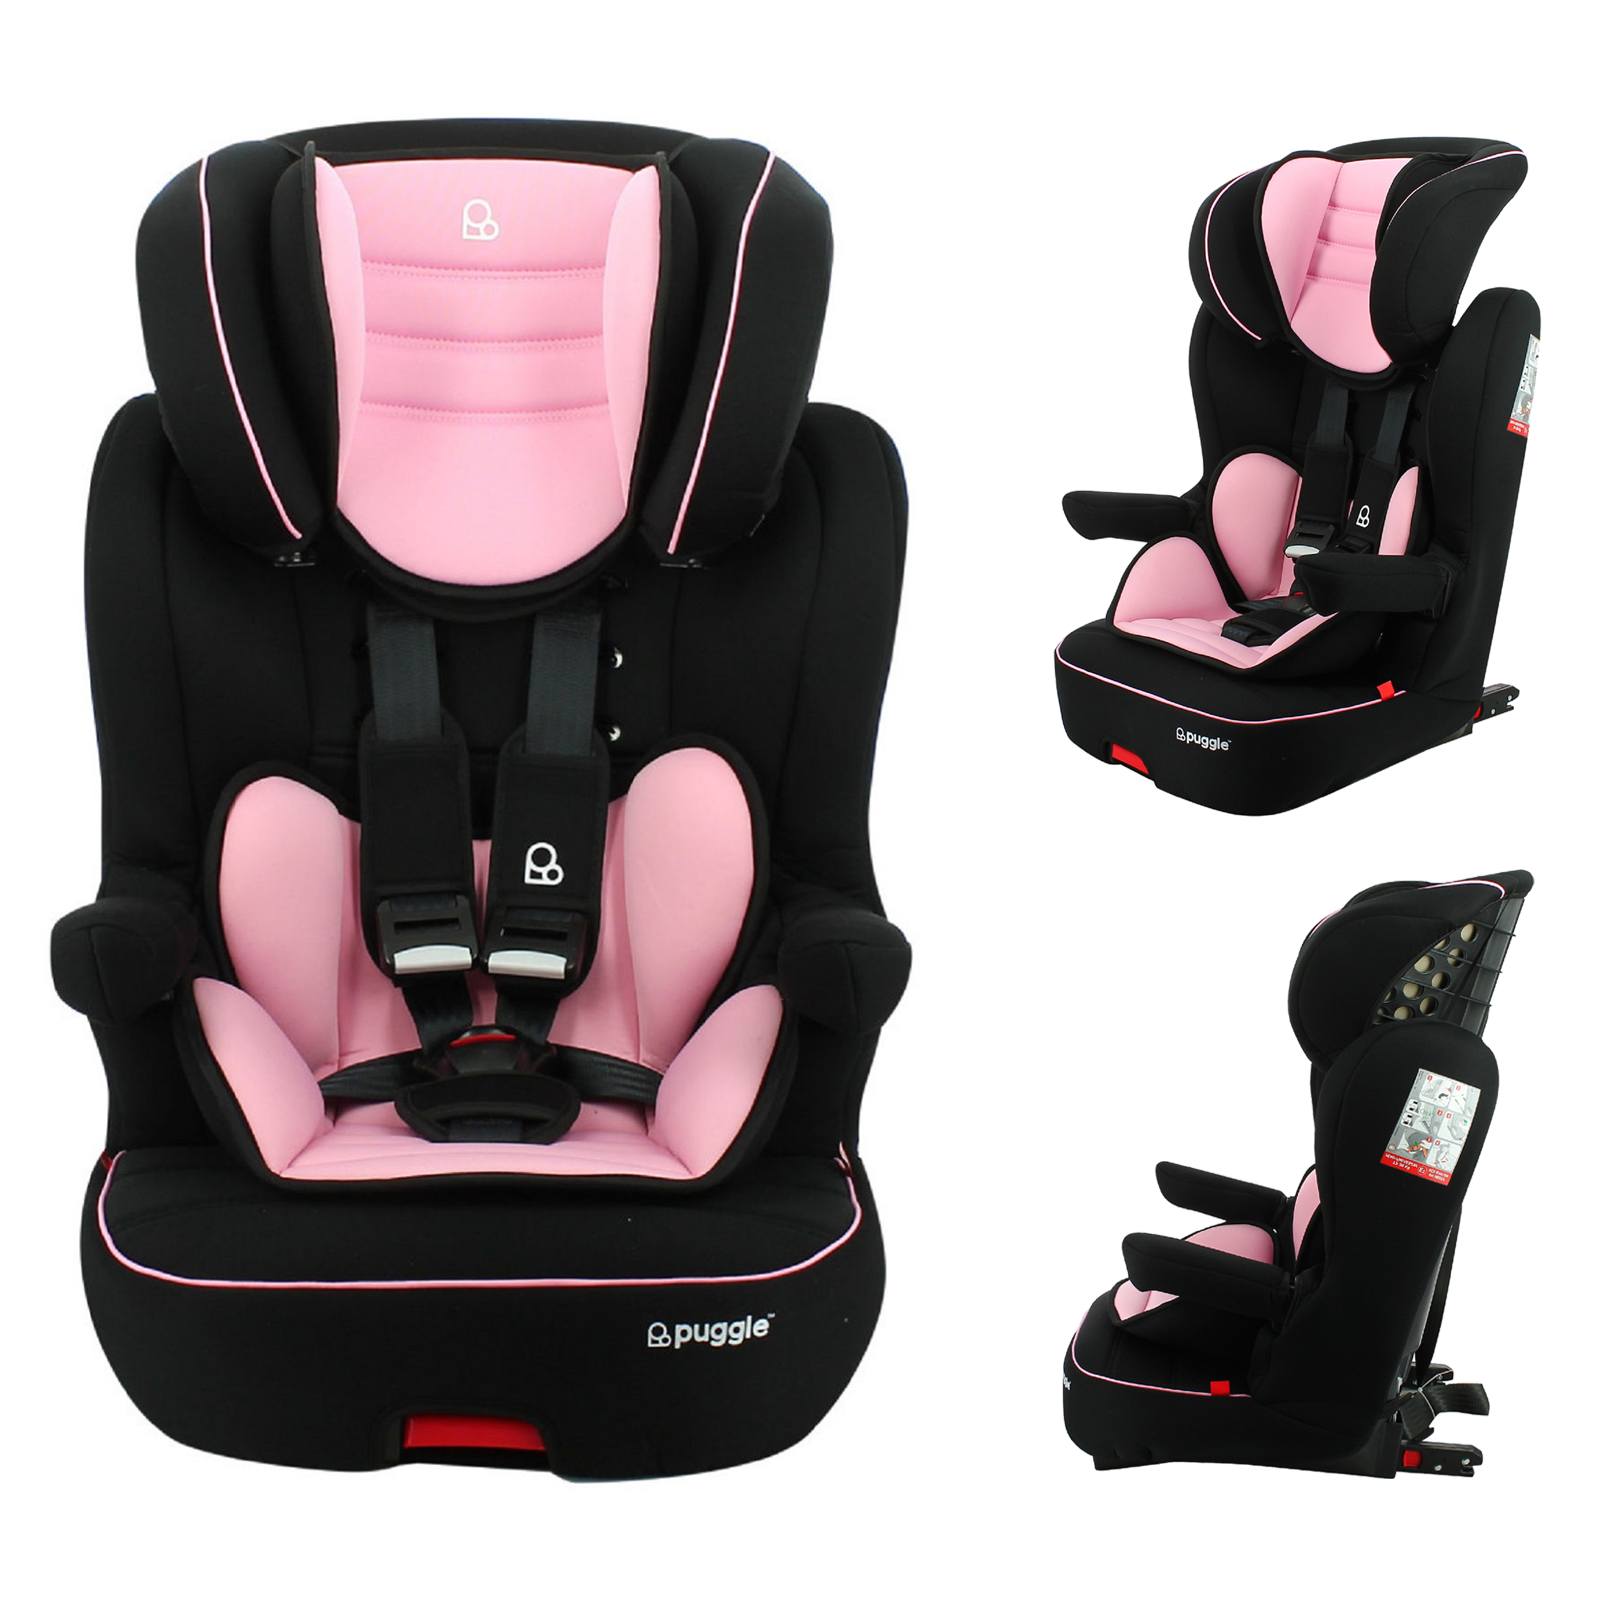 Puggle Kingston Safety Plus Luxe ISOFIX Group 1,2,3 Car Seat - Blush Pink